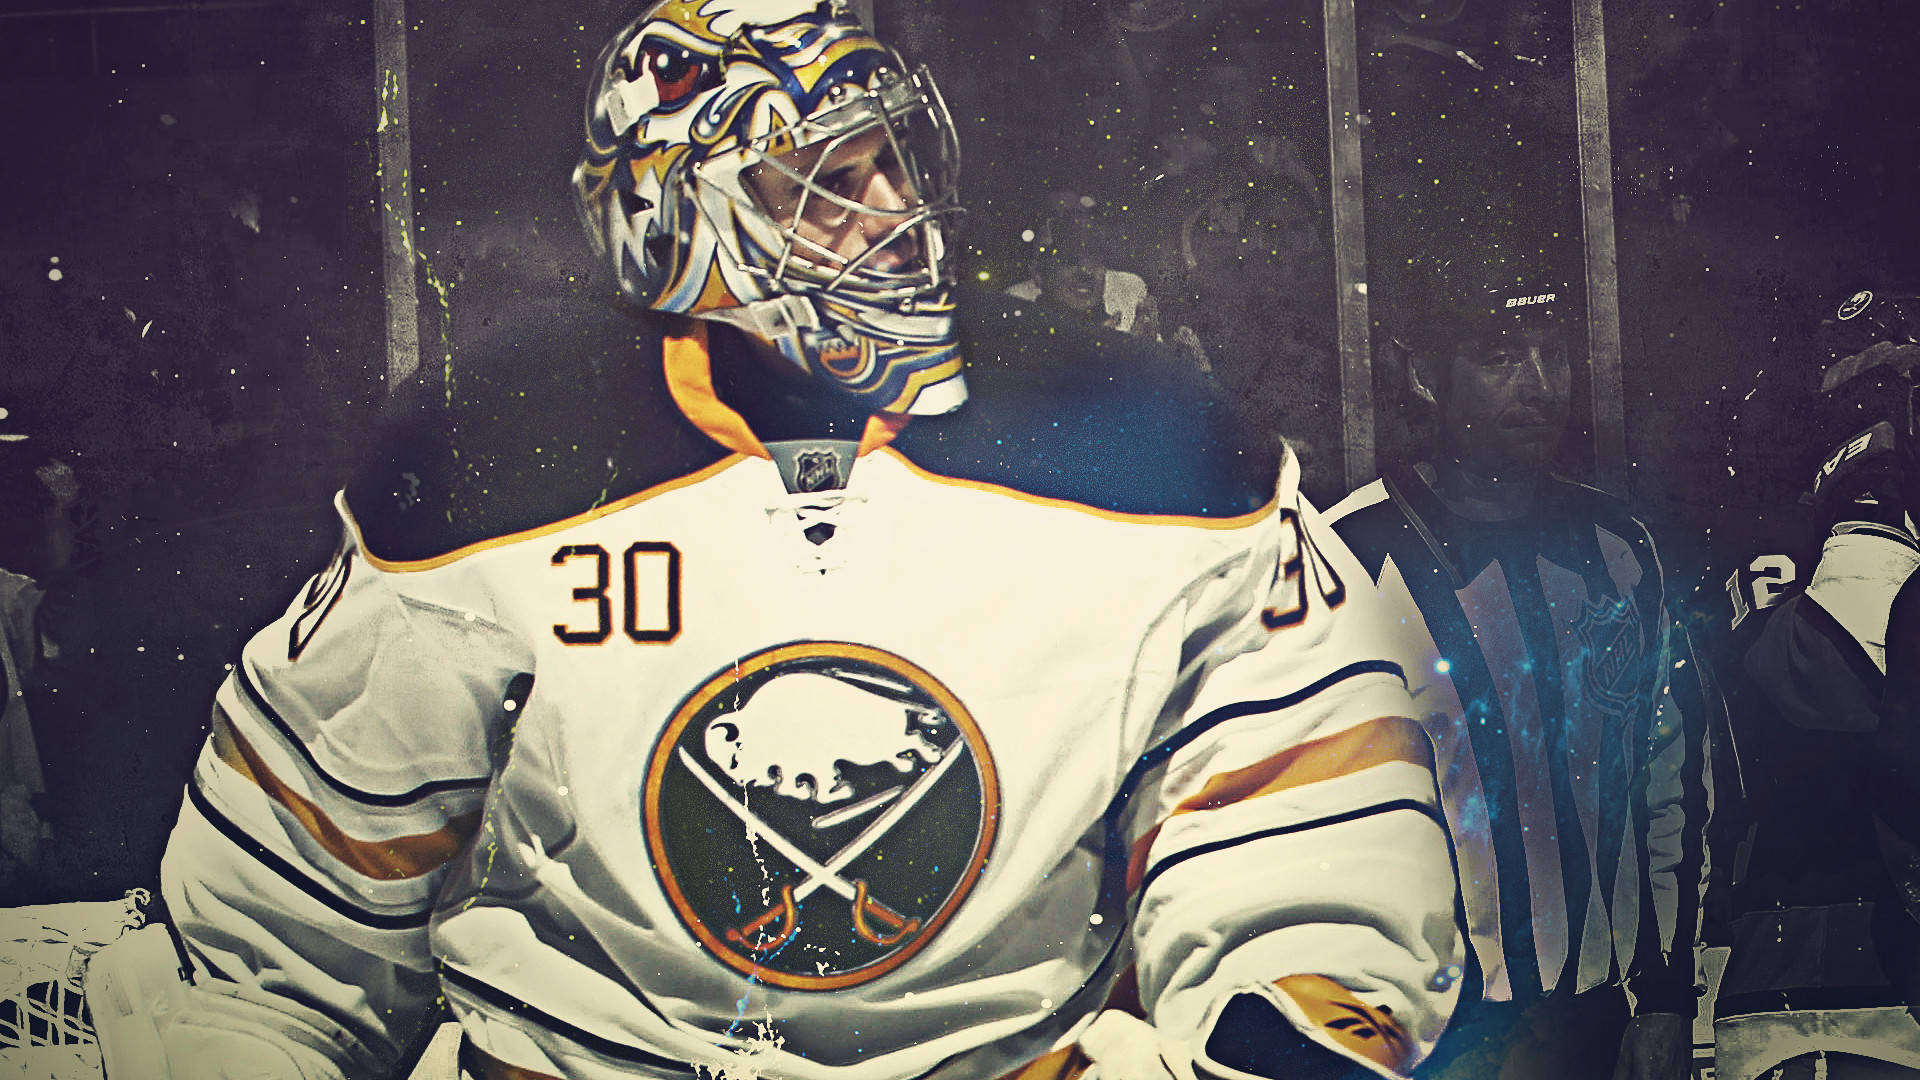 Caption: Buffalo Sabres Star Player, Ryan Miller in action on the ice. Wallpaper